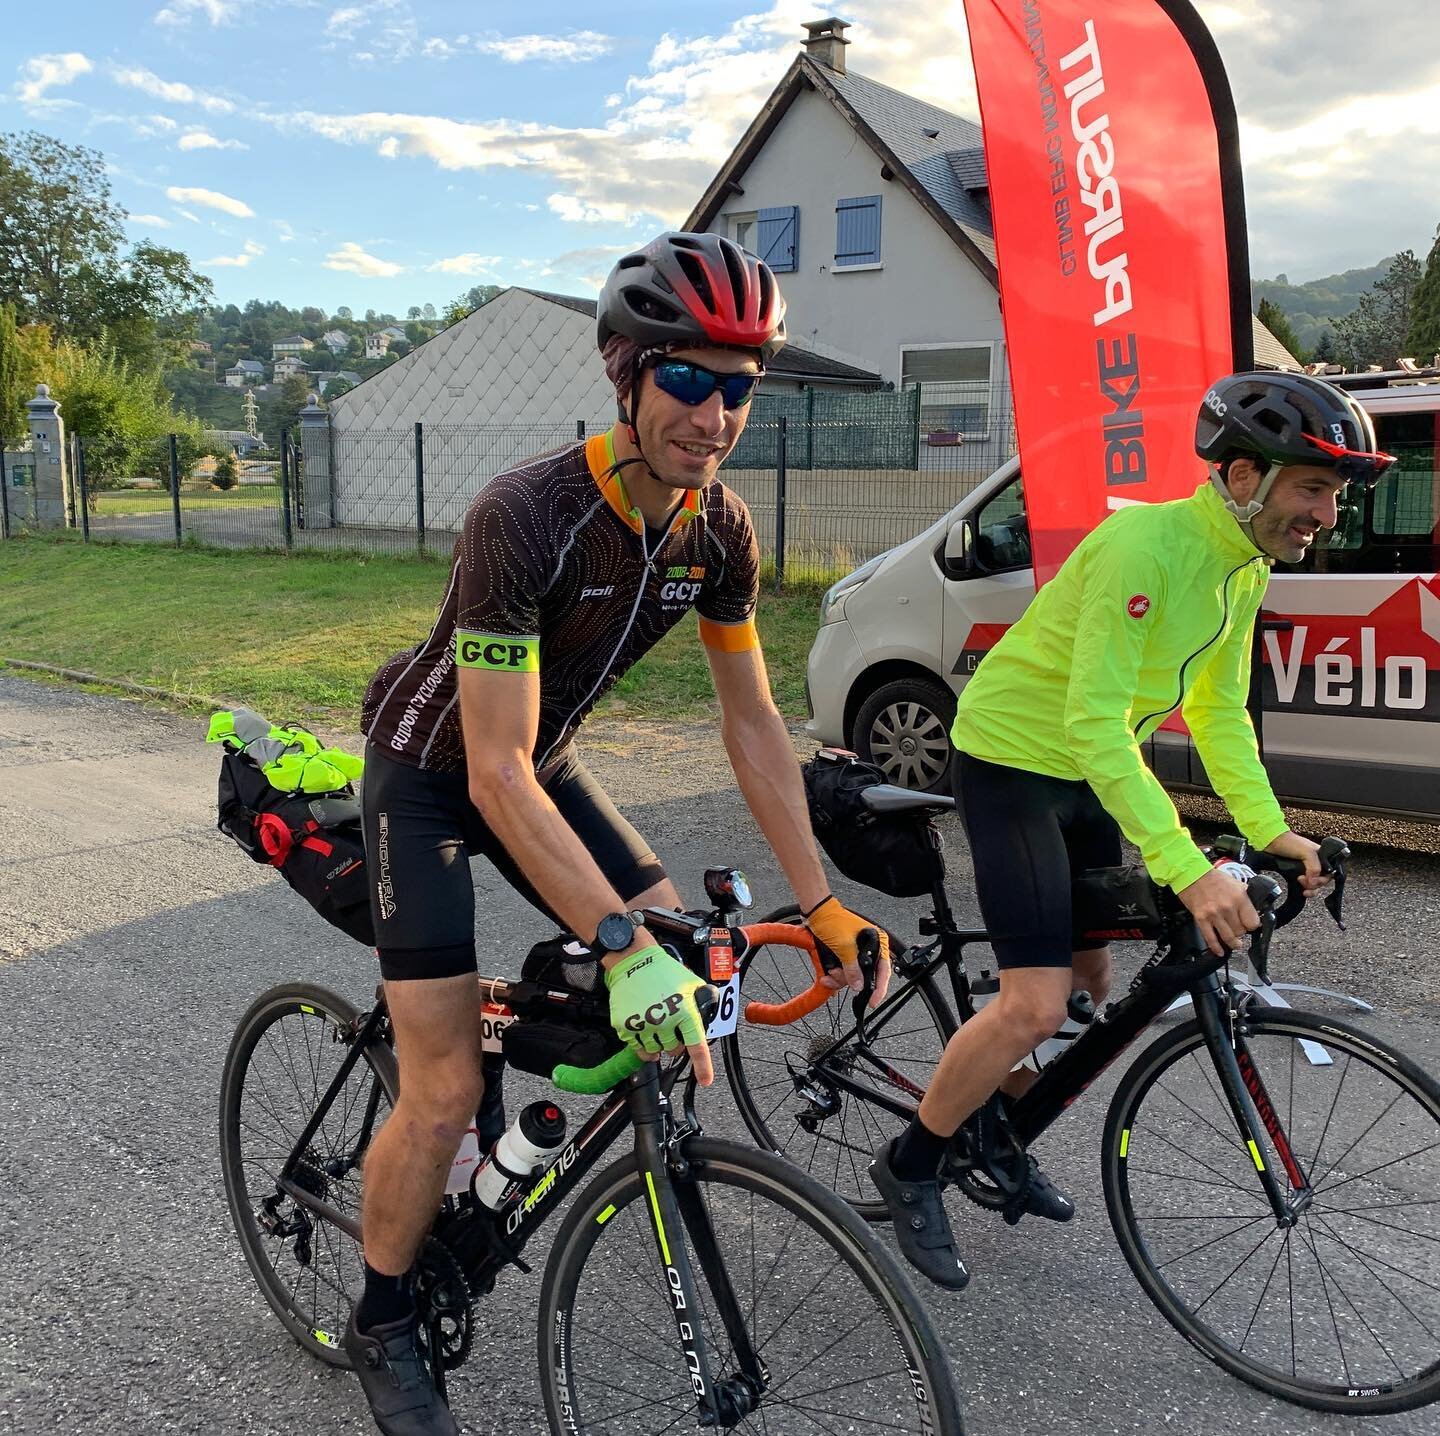 The Ultra Bike Pursuit part 2

As all participants of the 1100km Tourmalet Pursuit crossed the finish yesterday, two more cyclists, Alex and Guillaume, took the start of the Hautacam Pursuit for 500km and 1200km respectively, of mountains road cyclin